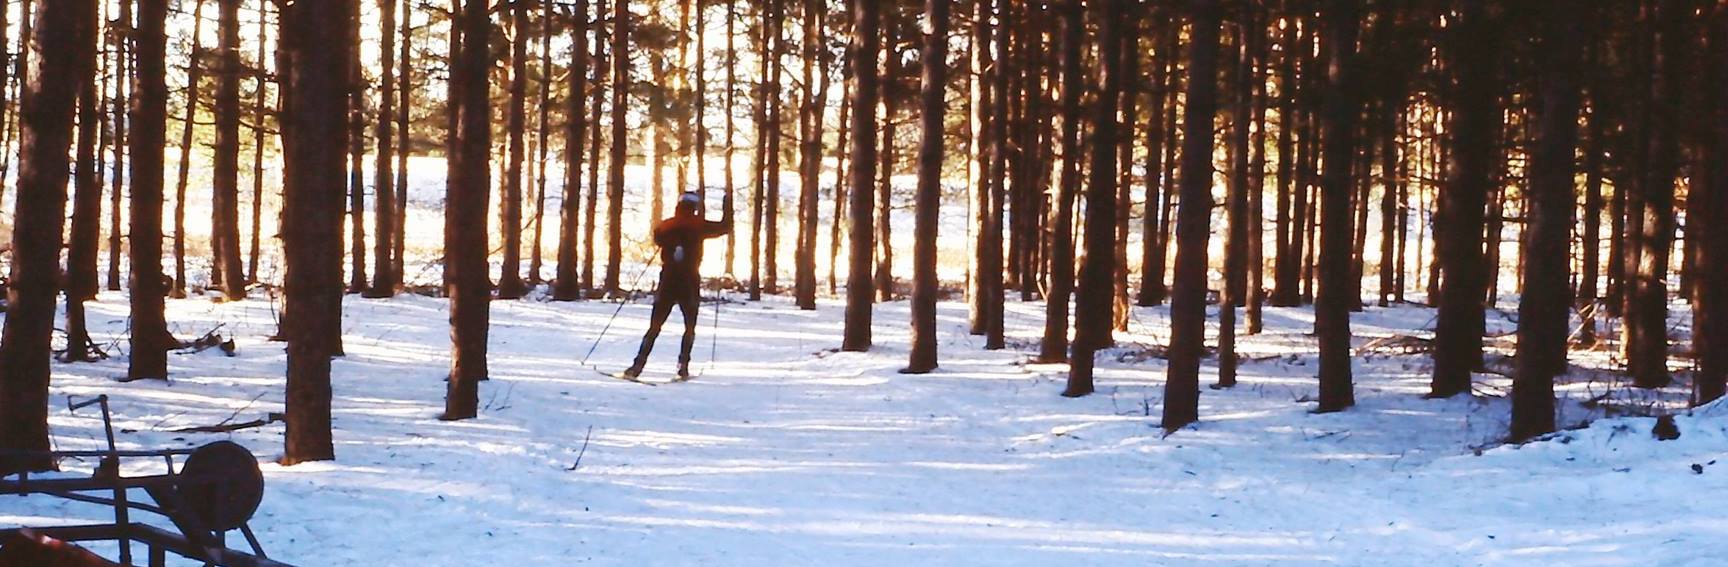 Cross-country skier at Sawmill Nordic Centre, Hepworth, Ontario - 1999